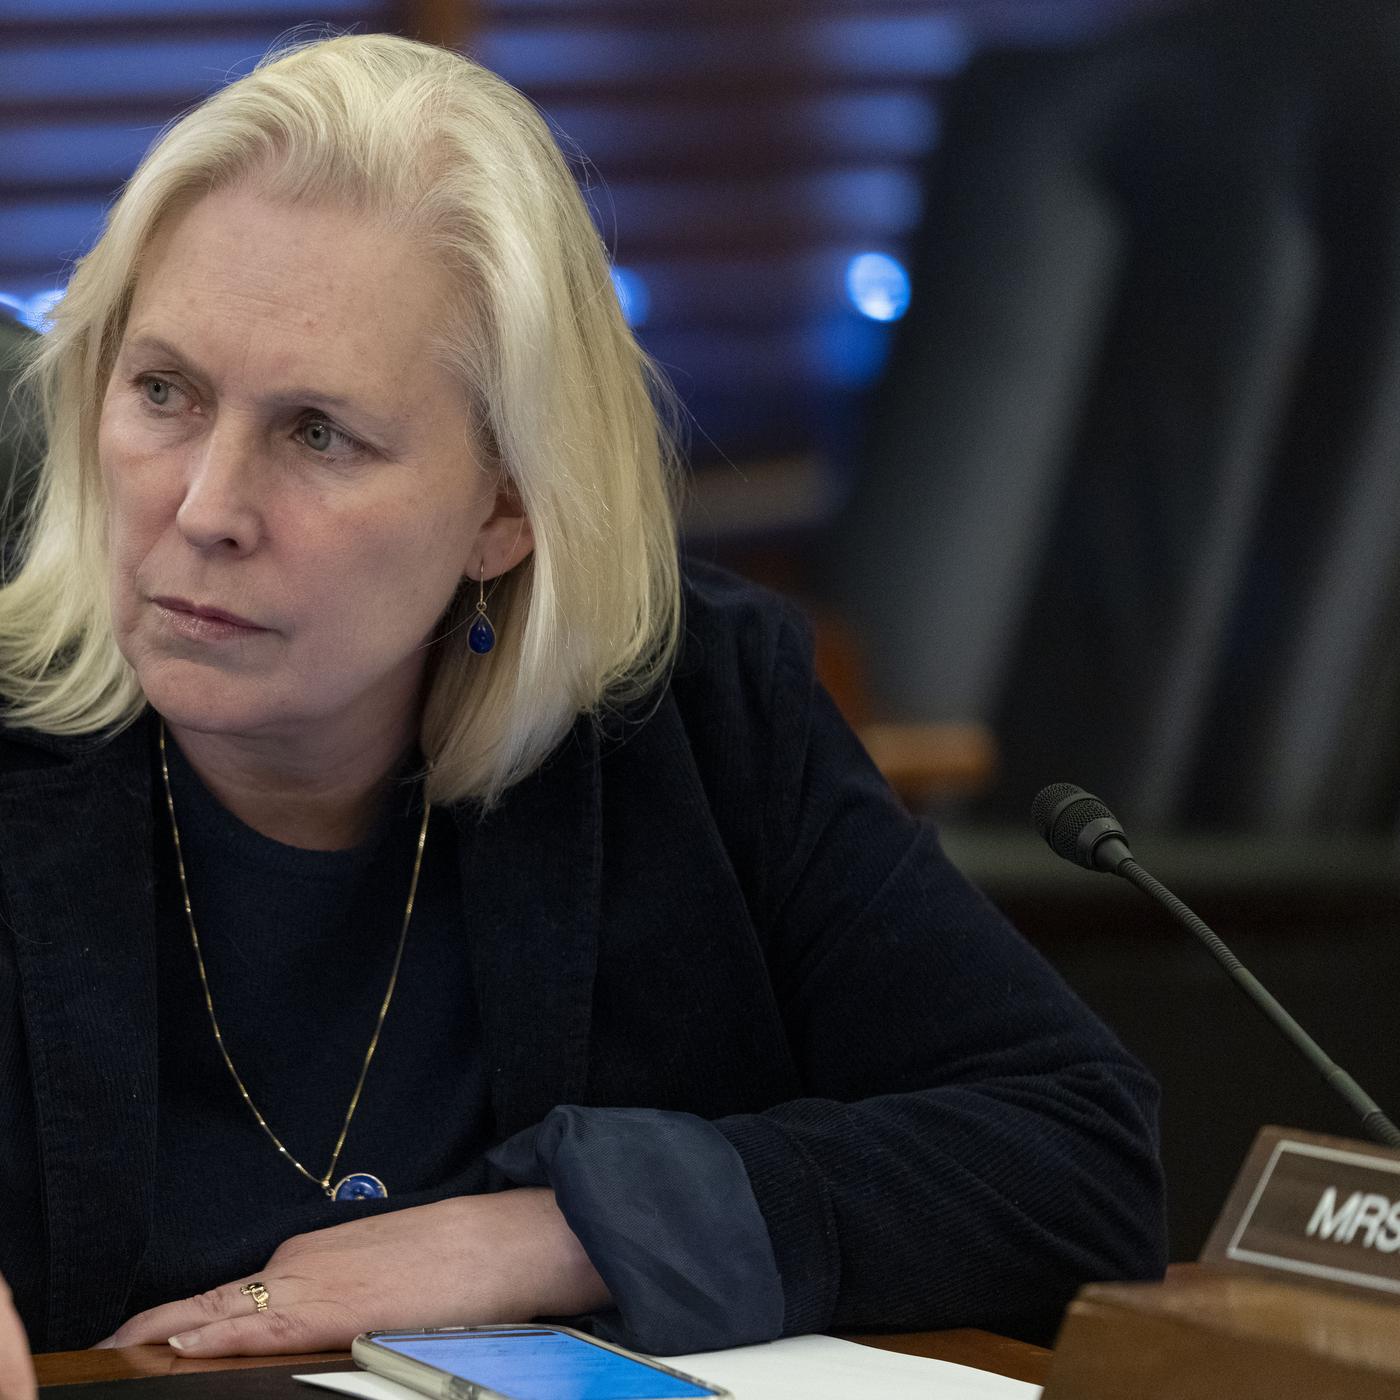 Call Your Senator: Sen Gillibrand on Child Care for Police, Israel's
Response to Iran and More